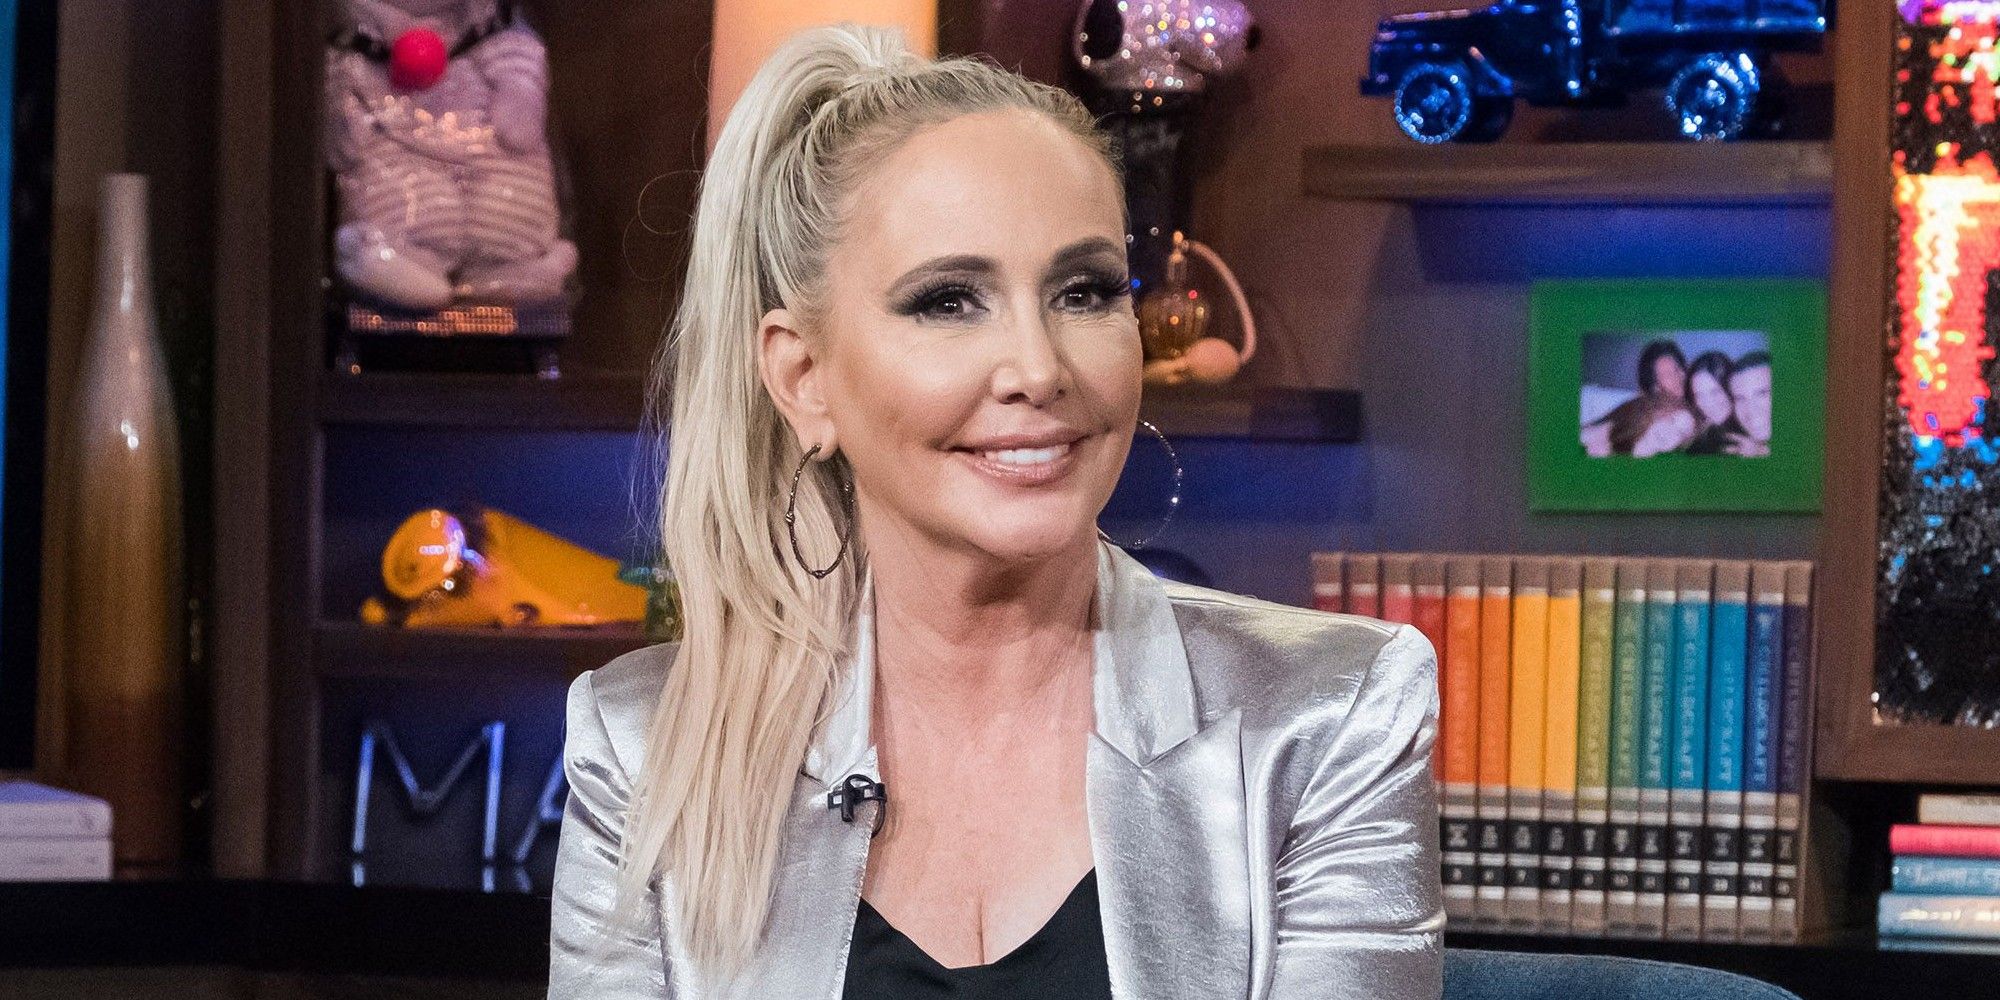 RHOC Shannon Beador Gives Her Thoughts On The Season 16 Cast